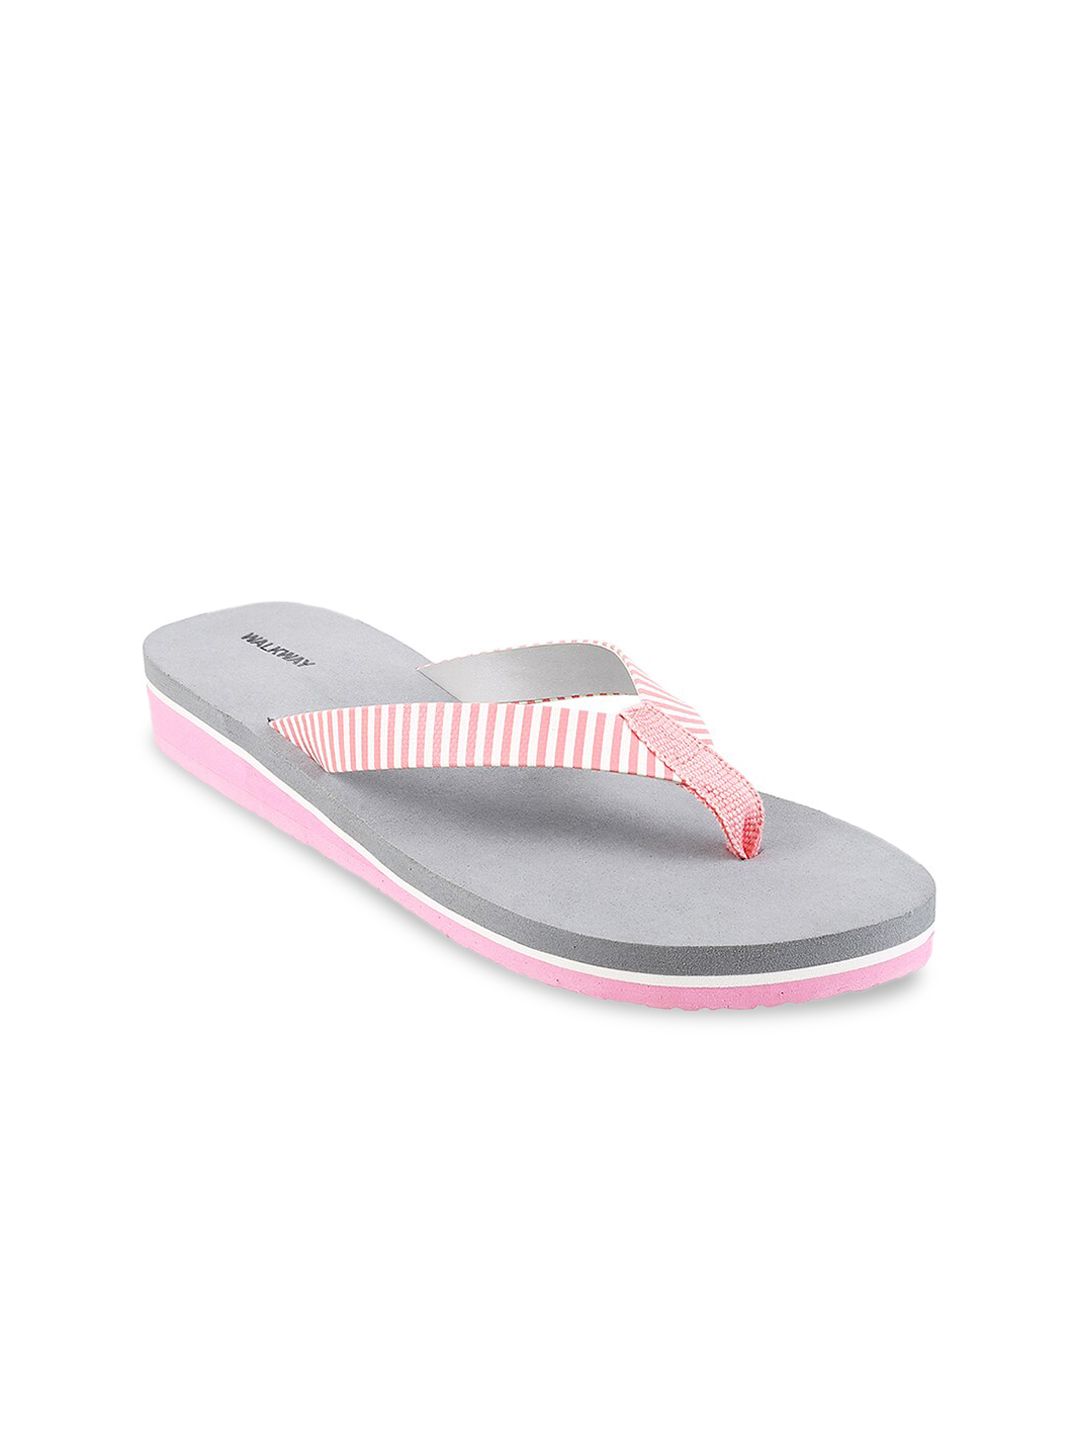 WALKWAY by Metro Pink Striped Wedge Sandals Price in India